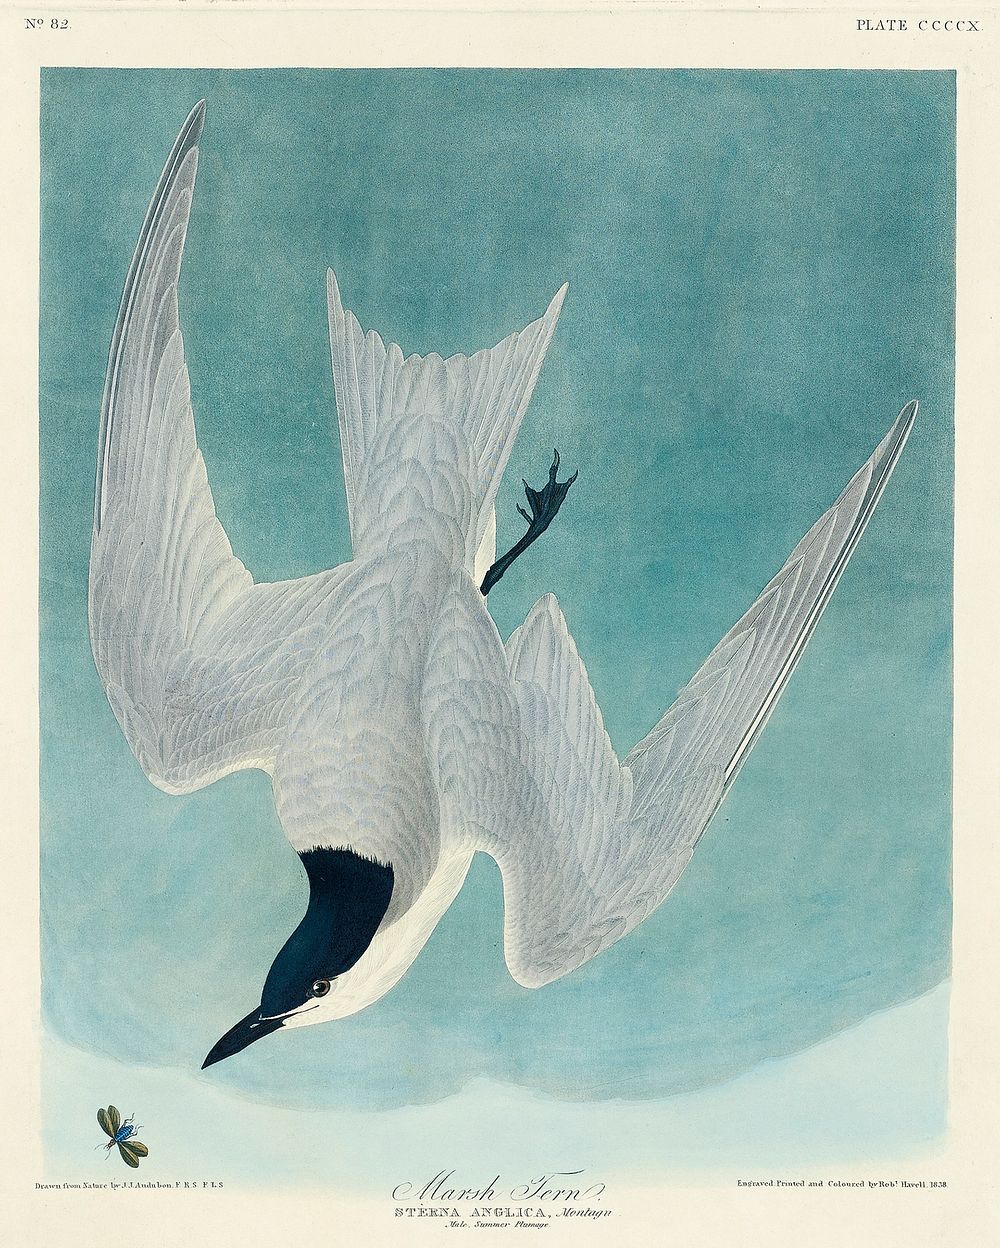 Marsh Tern from Birds of America (1827) by John James Audubon (1785 - 1851), etched by Robert Havell (1793 - 1878). Original…